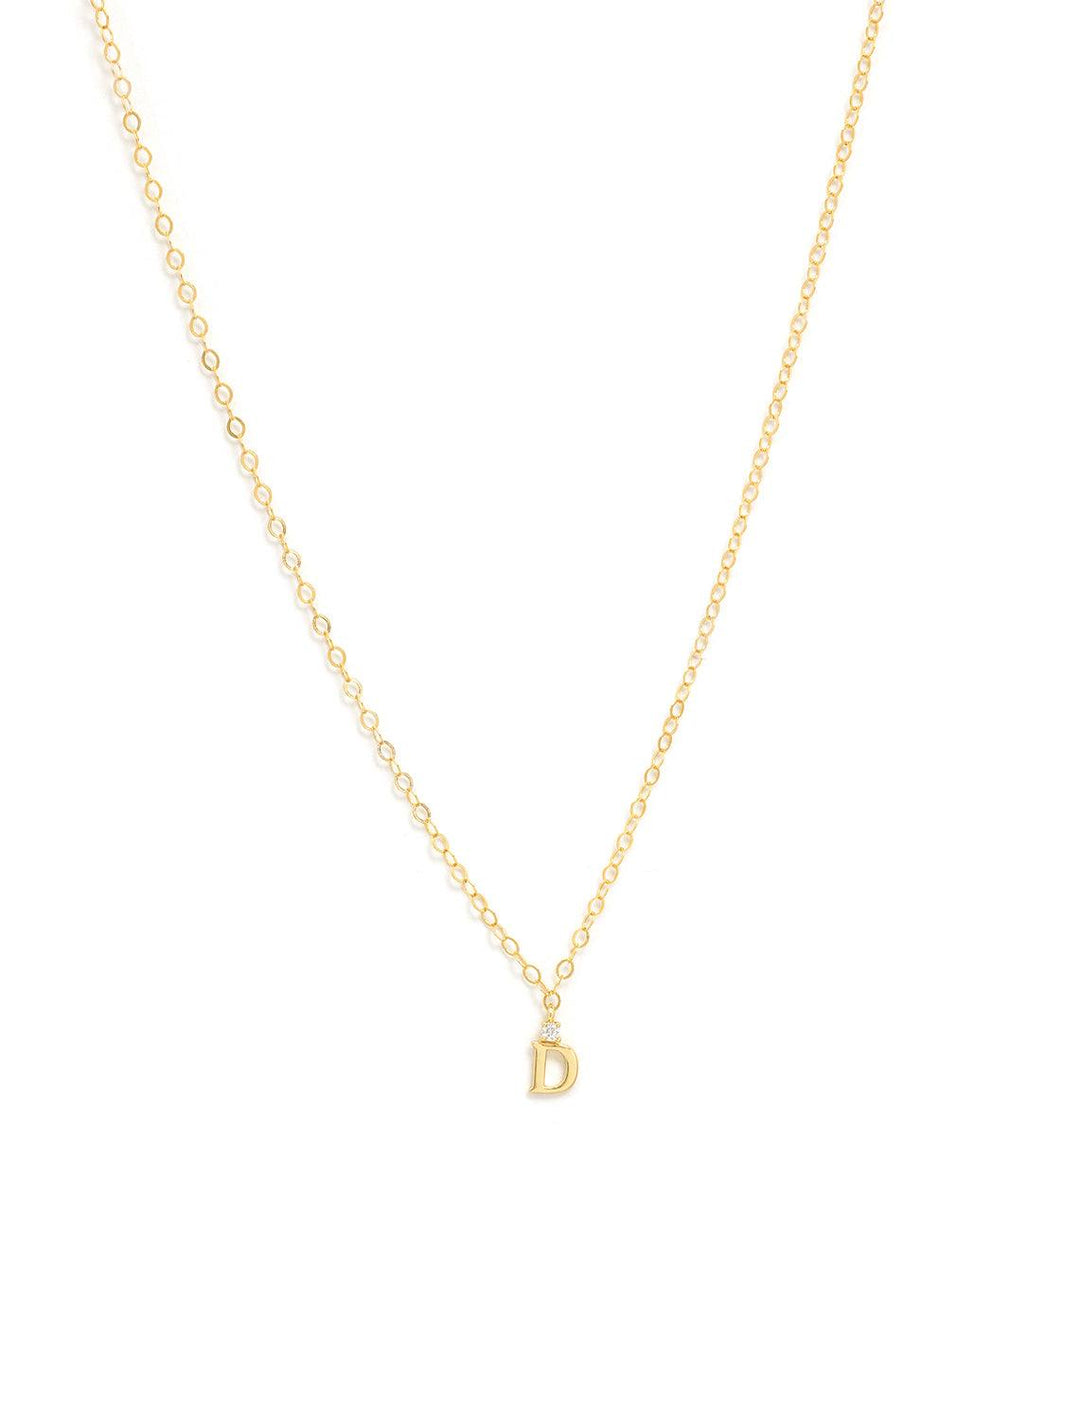 Marit Rae initial and cz necklace in gold | D - Twigs